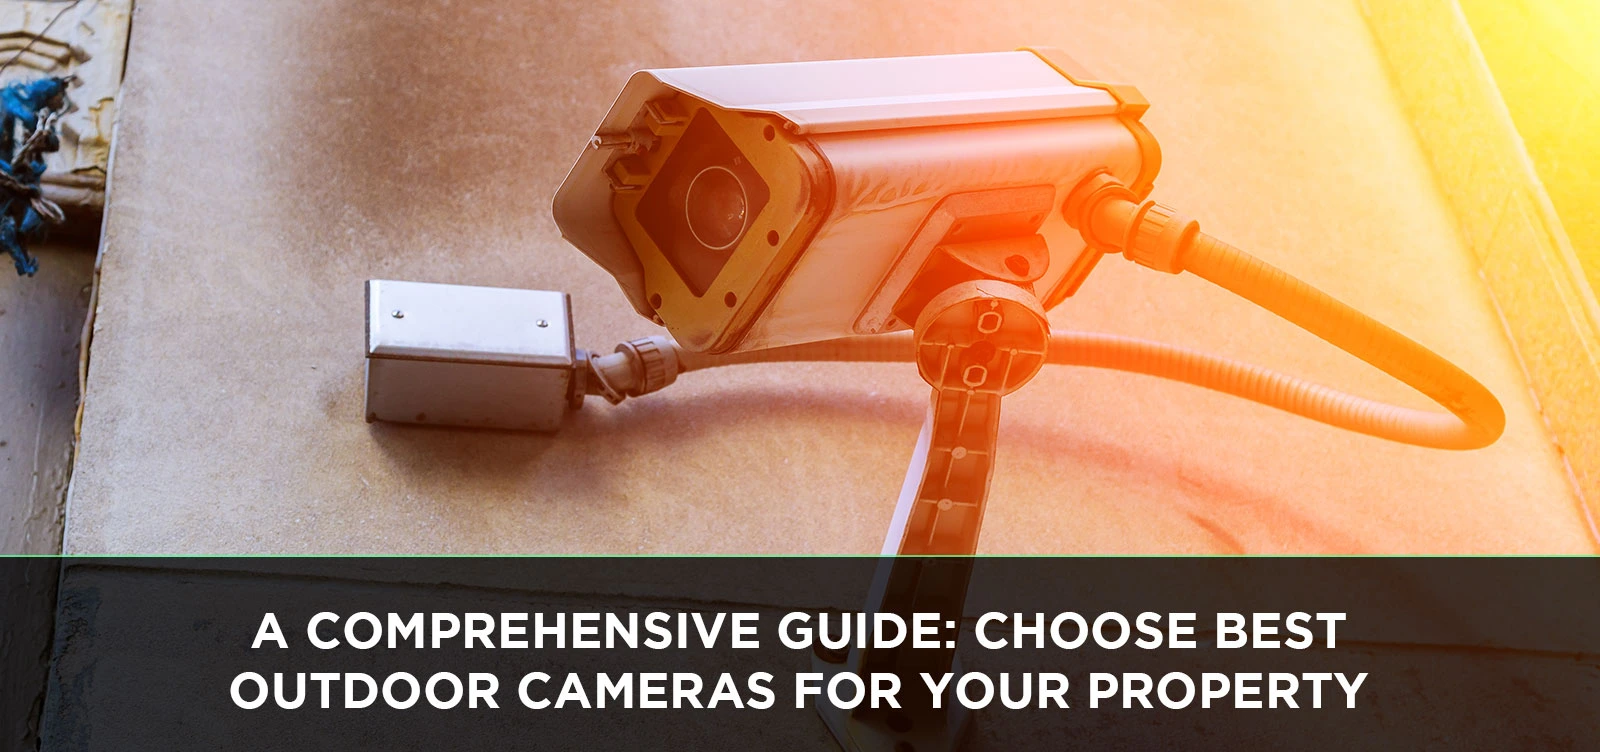 A Comprehensive Guide: Choose Best Outdoor Cameras for Your Property